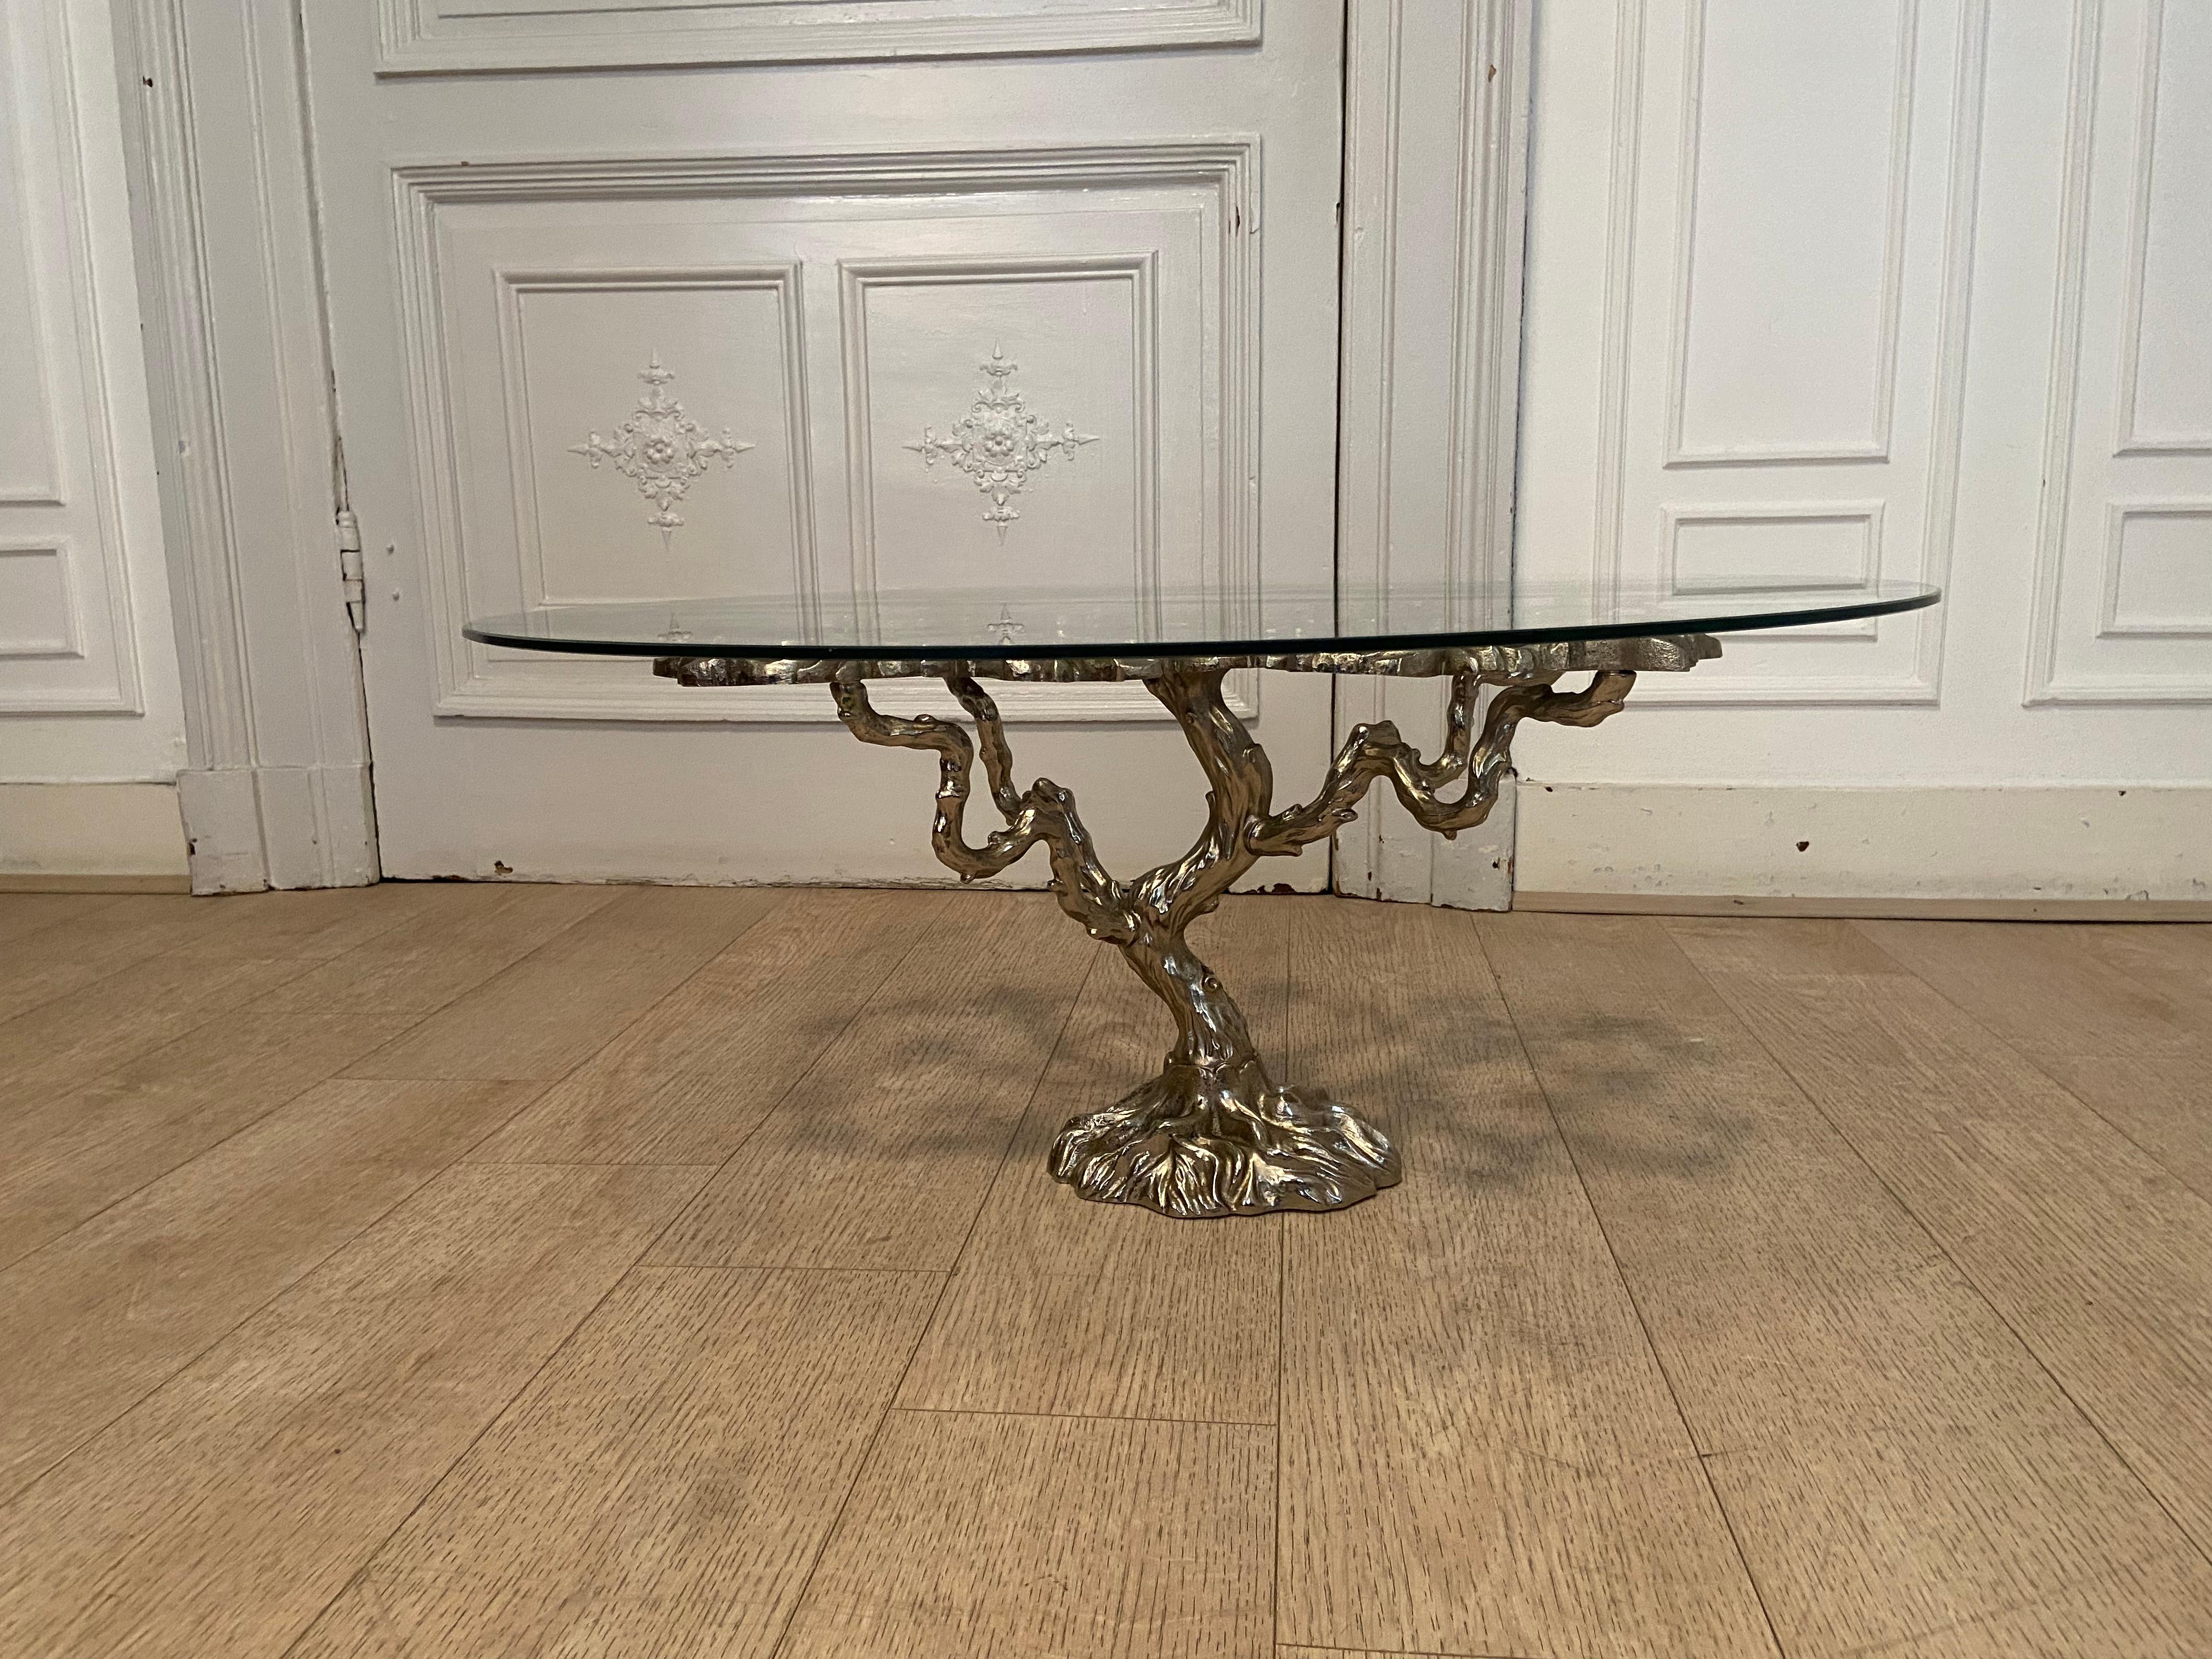 Mid Century Coffee Table in Silver Color from the 1970s Design with Vegetable 2